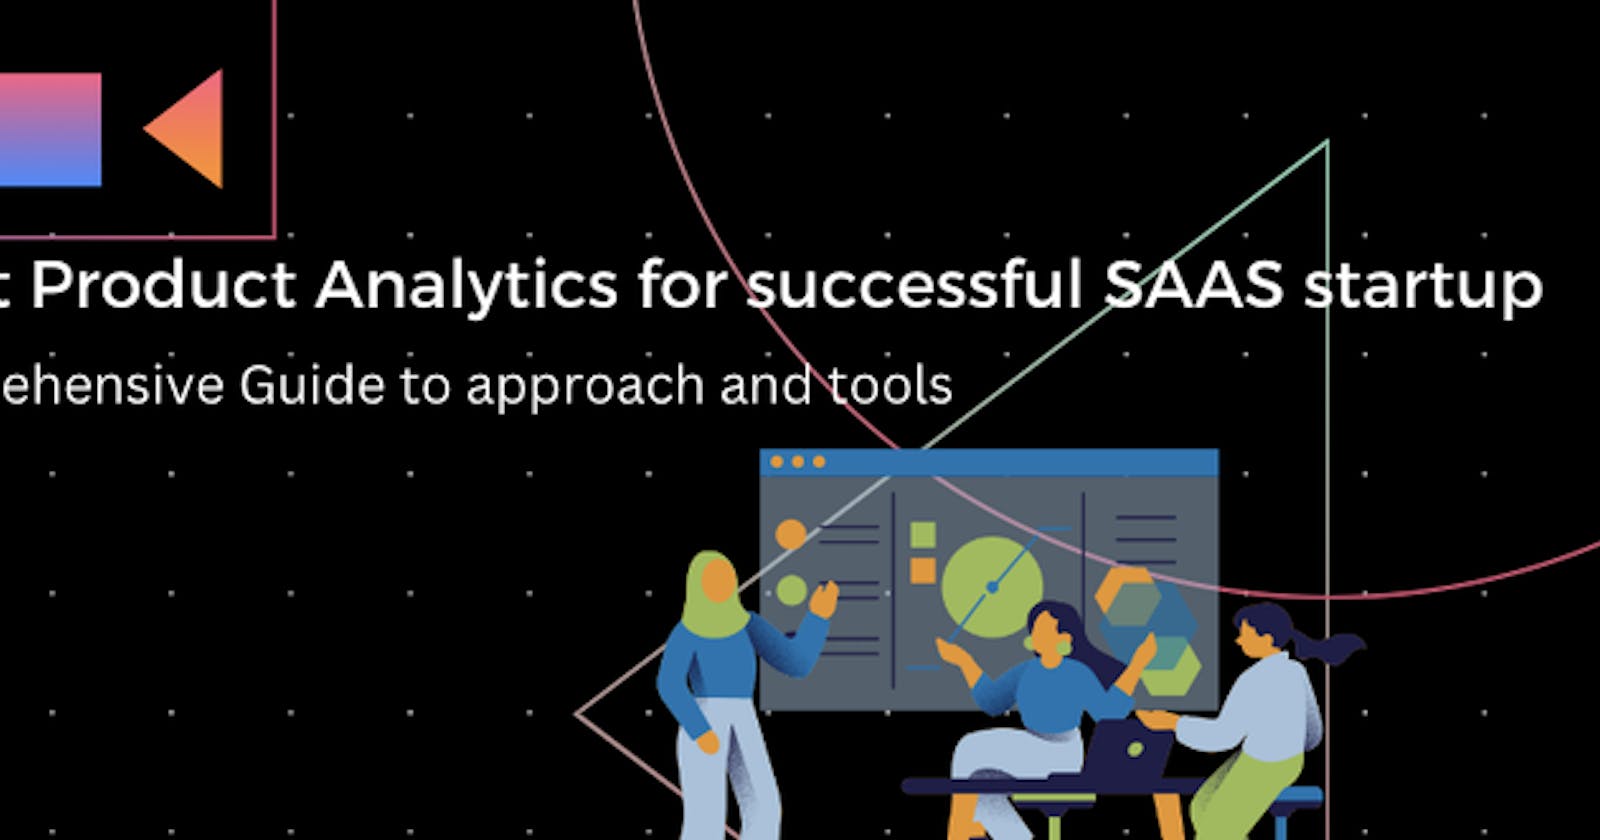 Right Product Analytics for successful SAAS startup